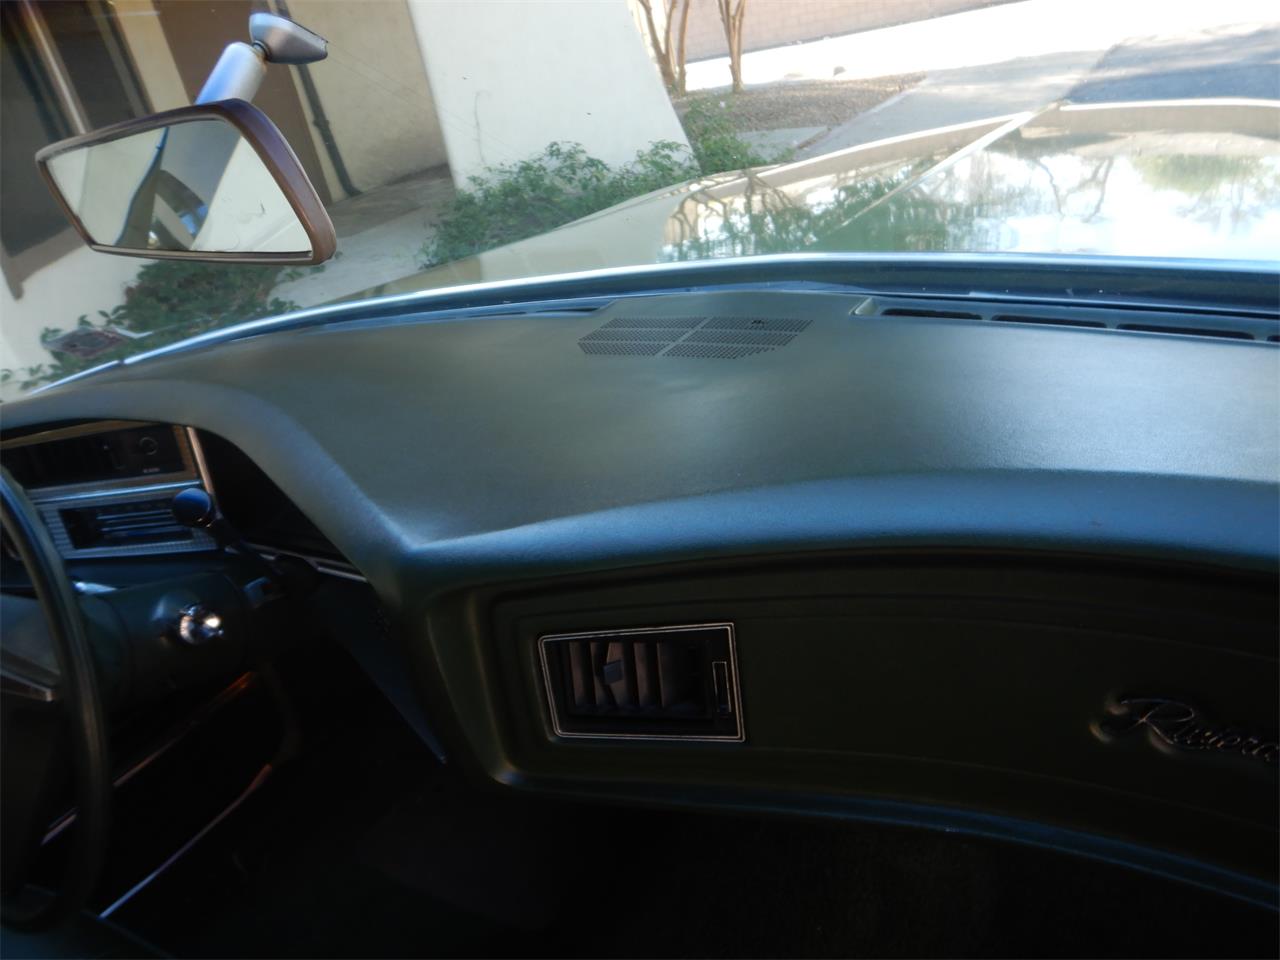 1971 Buick Riviera for sale in Woodland Hills, CA – photo 68